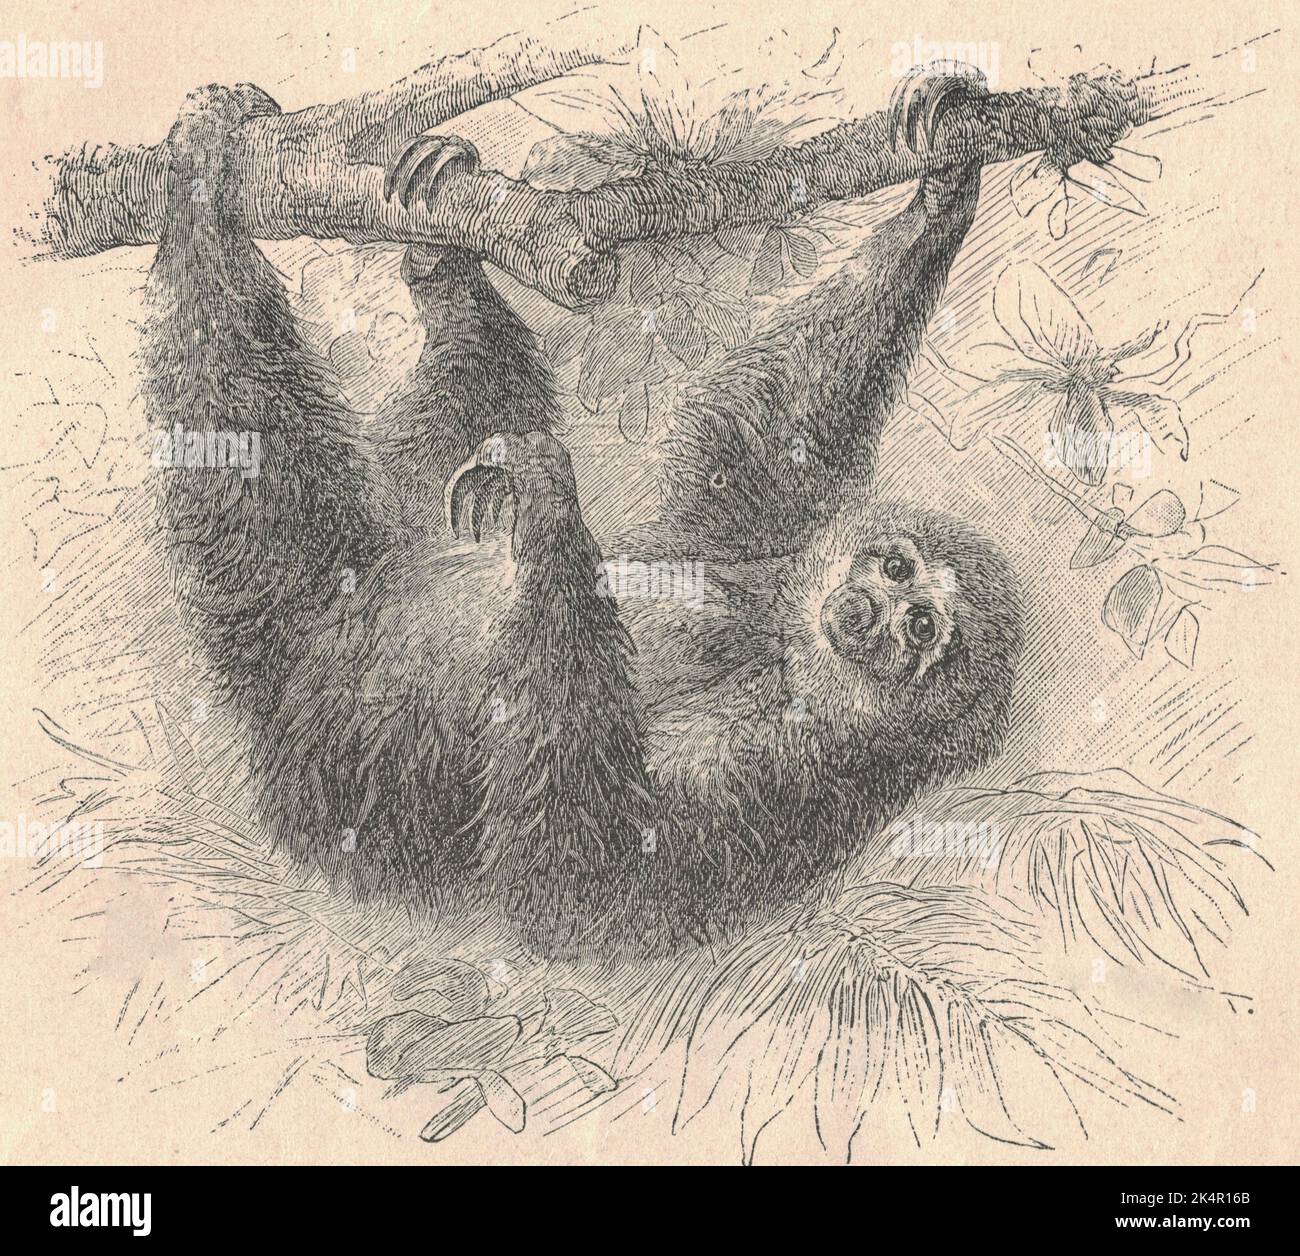 Antique engraved illustration of the three-toed sloth. Vintage illustration of the three-toed sloth. Old engraved picture of the animal. The three-toed or three-fingered sloths are arboreal neotropical mammals . They are the only members of the genus Bradypus and the family Bradypodidae. The four living species of three-toed sloths are the brown-throated sloth, the maned sloth, the pale-throated sloth, and the pygmy three-toed sloth. In complete contrast to past morphological studies, which tended to place Bradypus as the sister group to all other folivorans, molecular studies place them neste Stock Photo